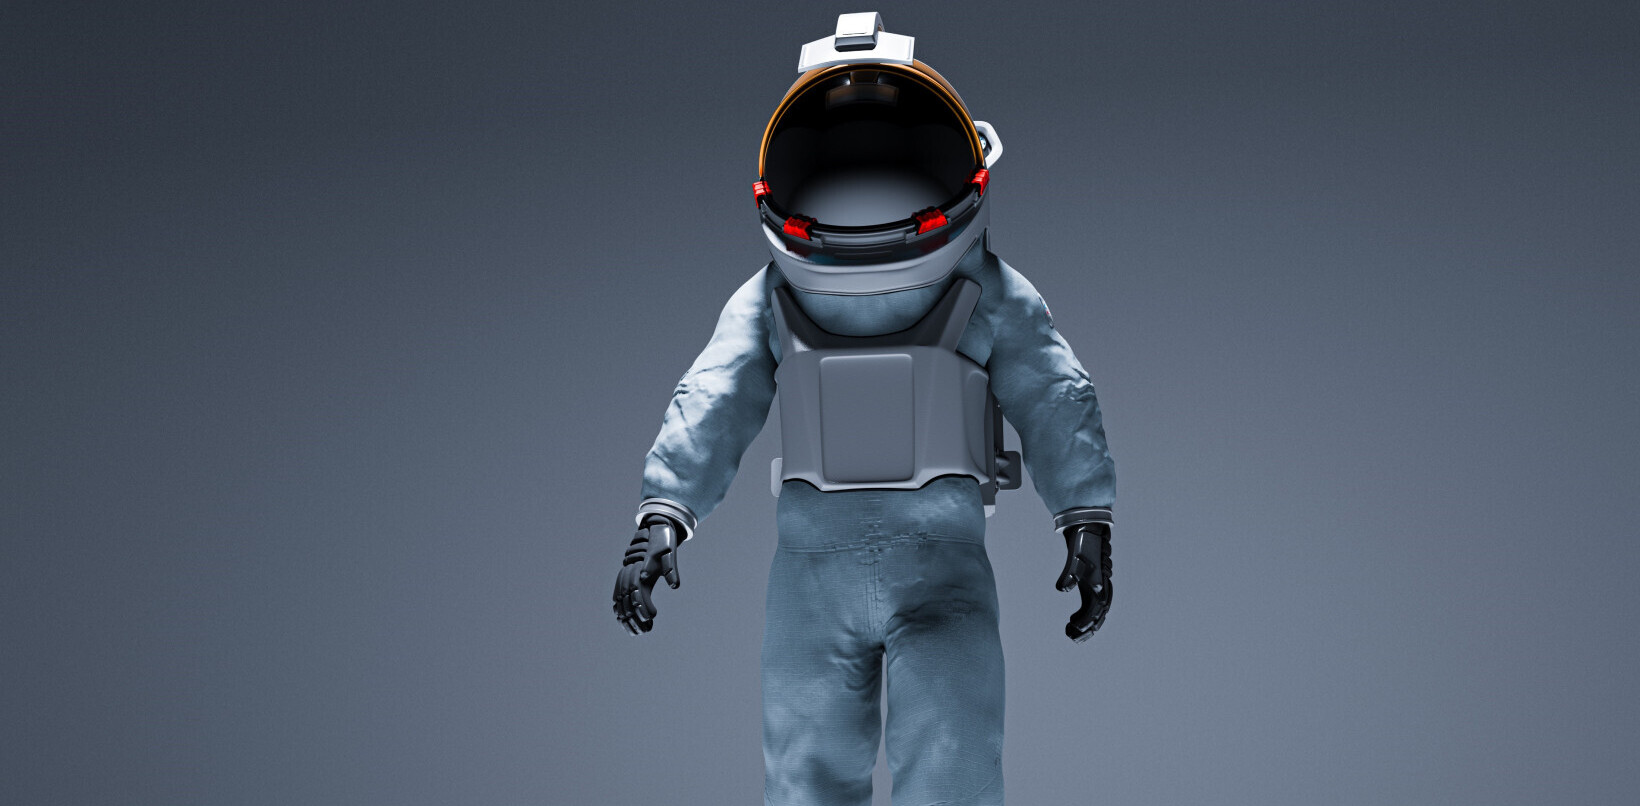 These antimicrobial spacesuits could solve astronauts’ laundry woes